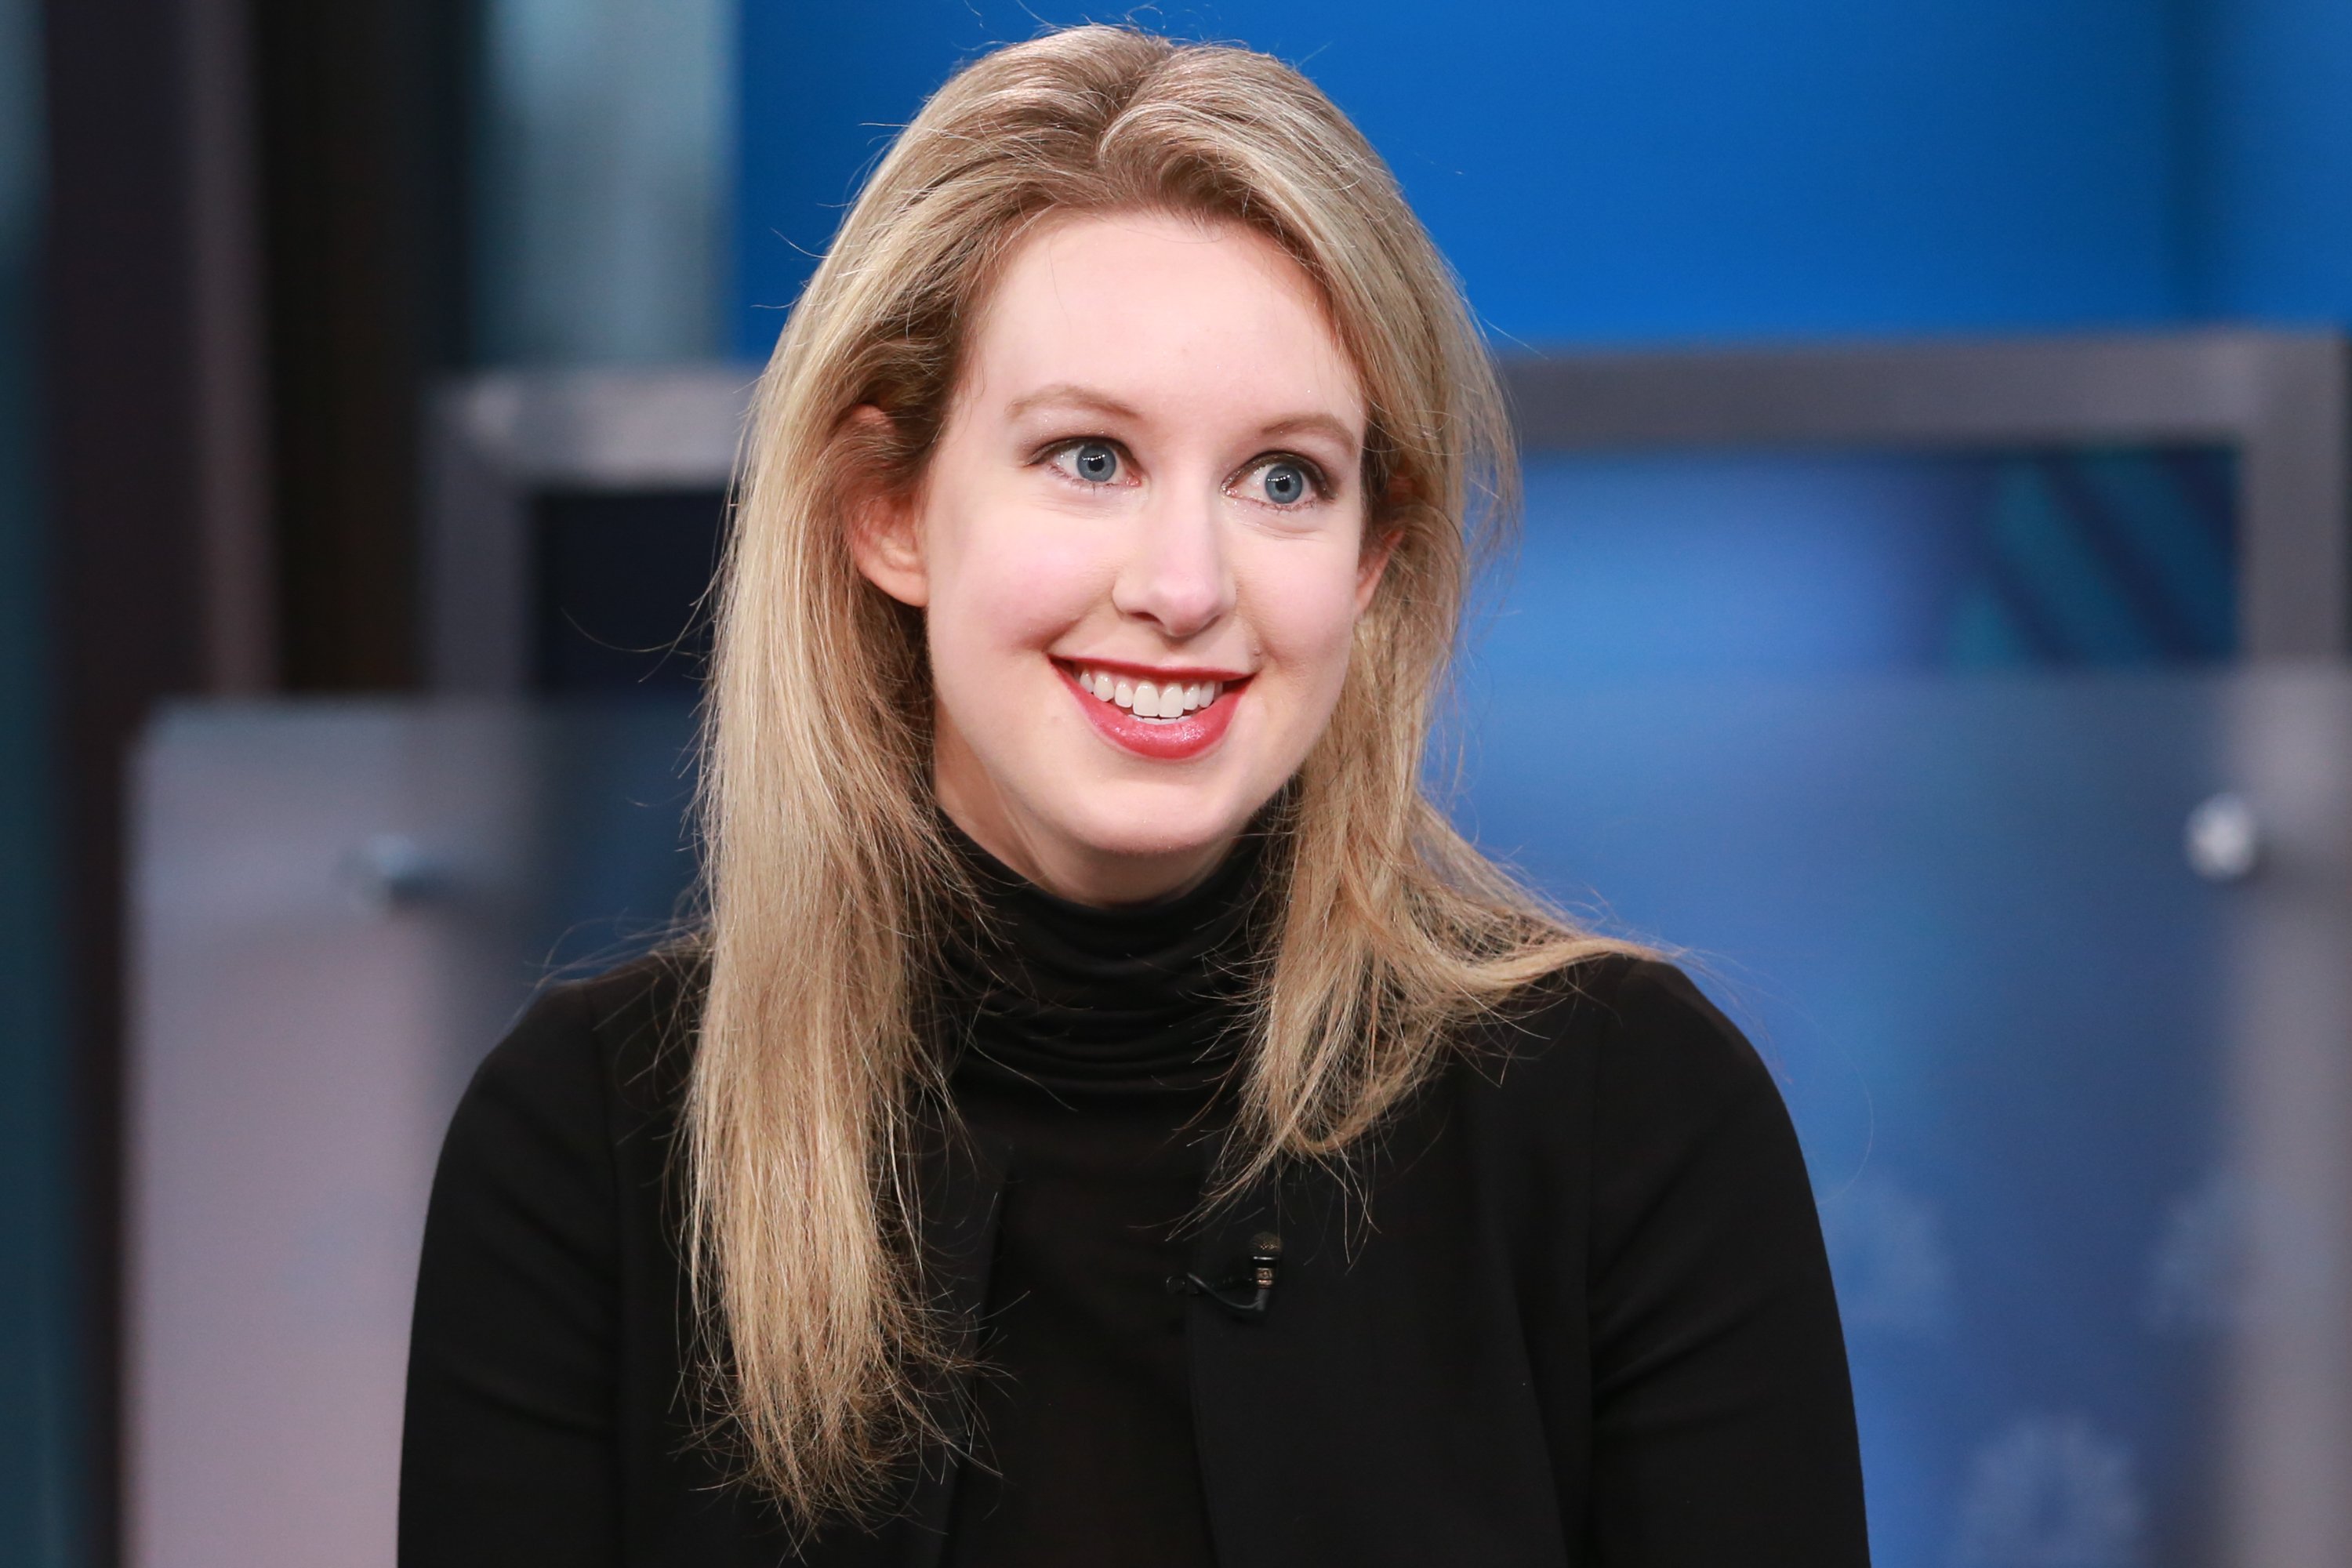 Elizabeth Holmes, Theranos CEO, in an interview on September 29, 2015. | Source: Getty Images